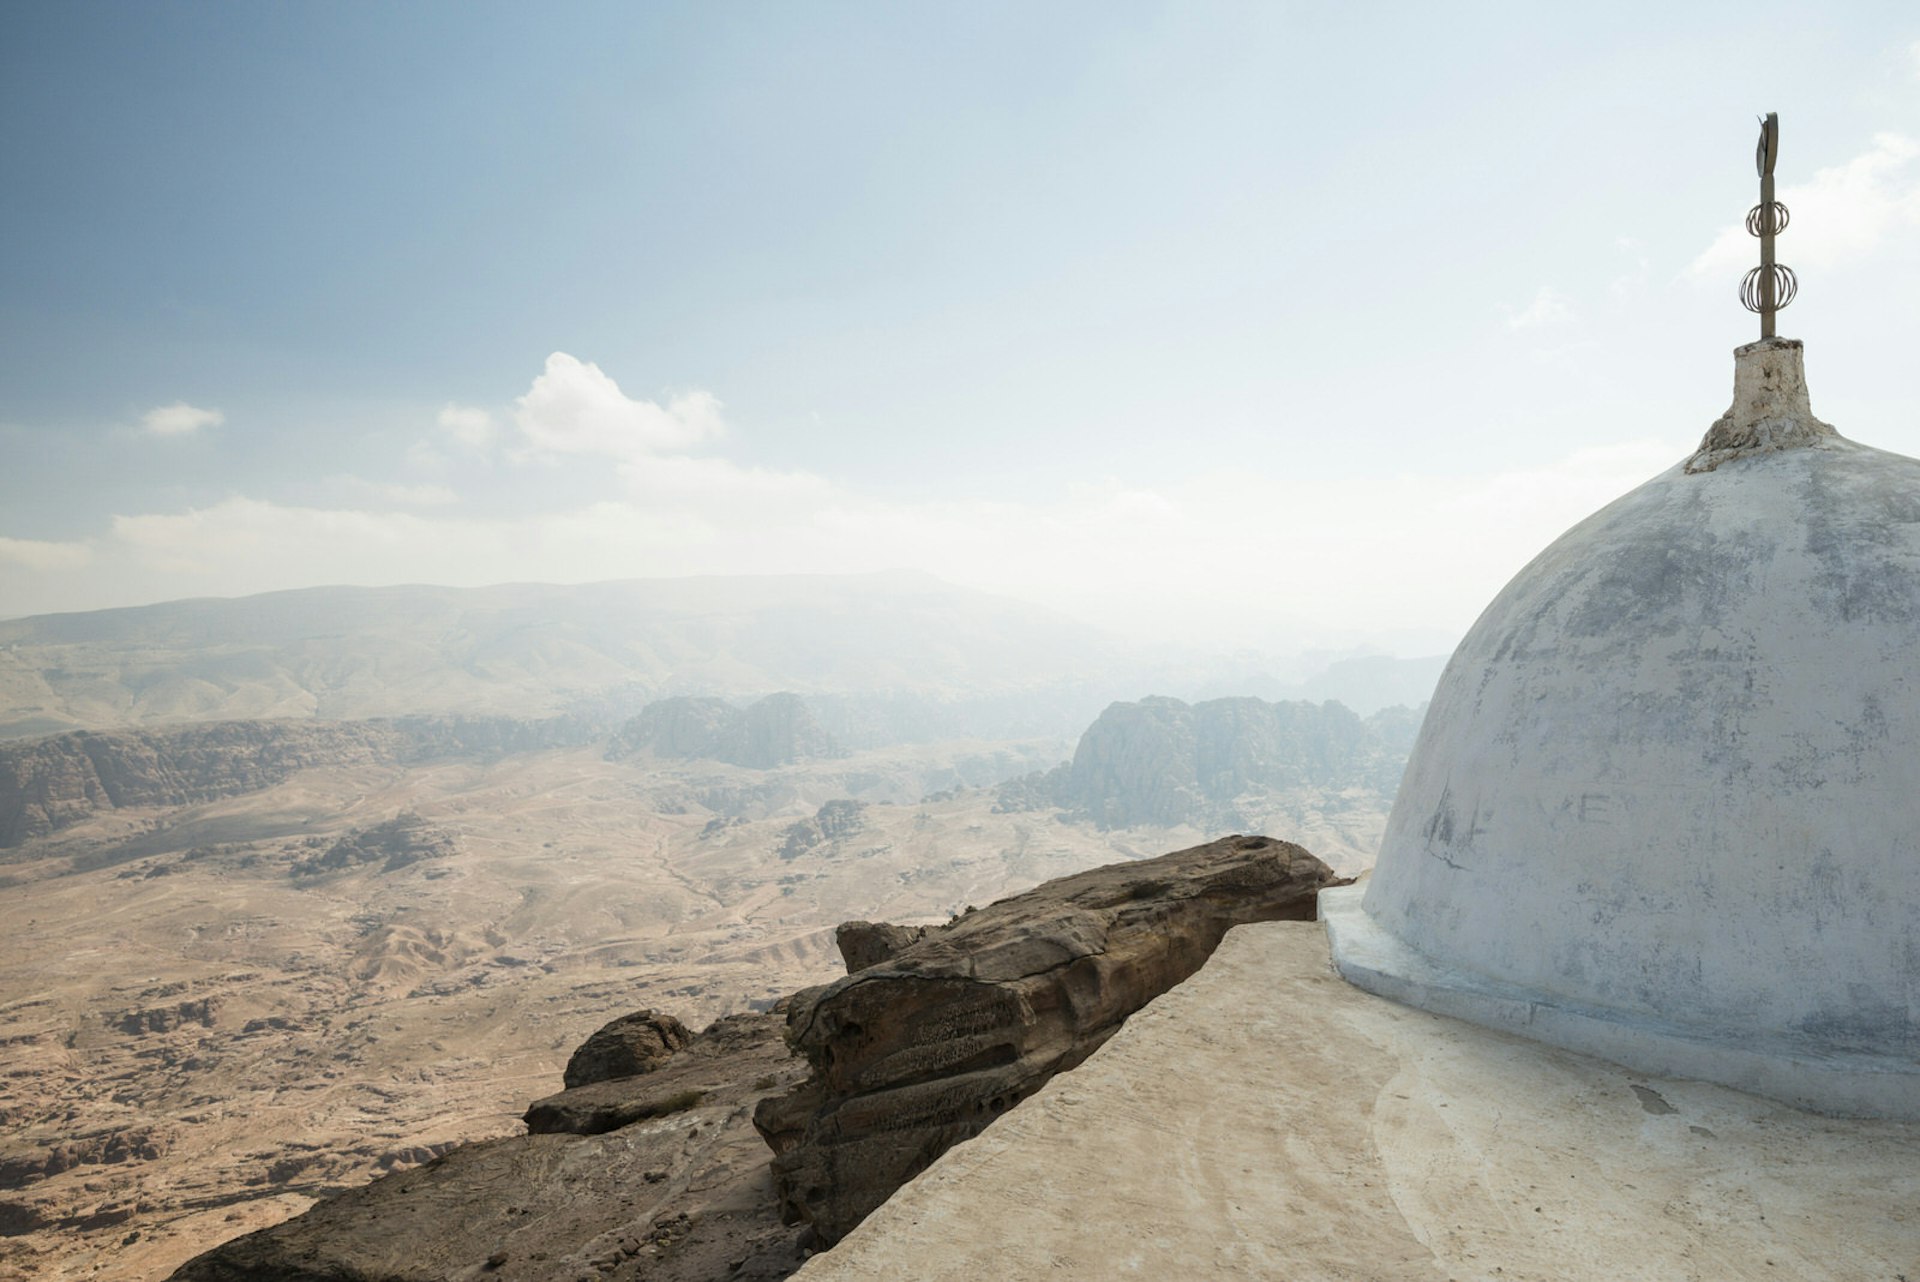 View of the surrounding desert from the whitewashed Tomb of the Prophet Aaron